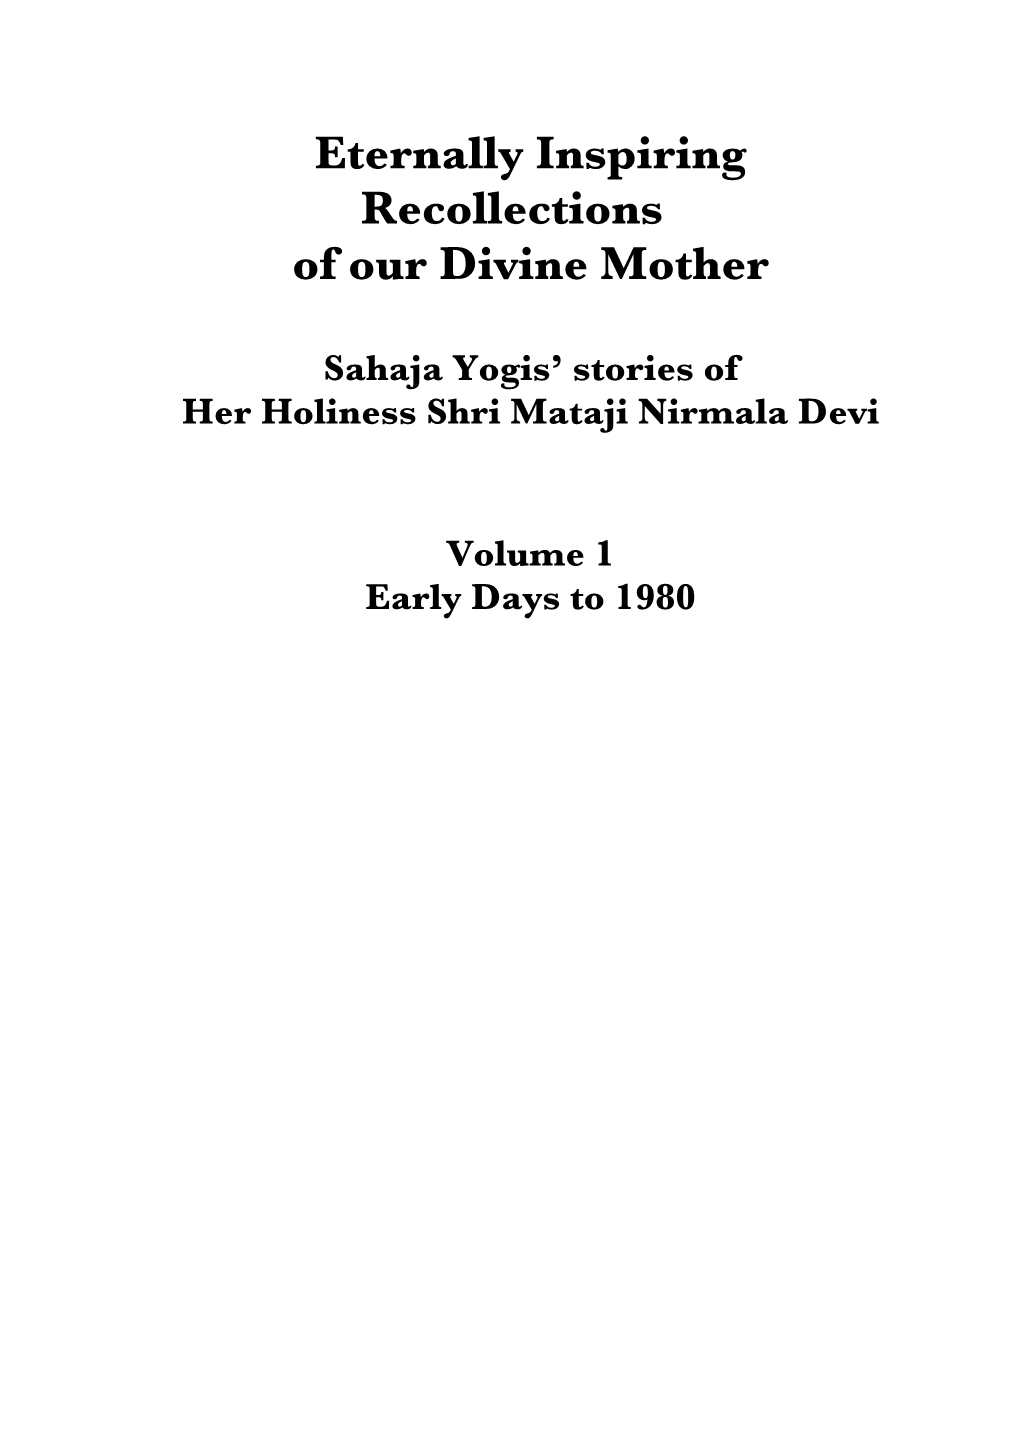 Eternally Inspiring Recollections of Our Divine Mother